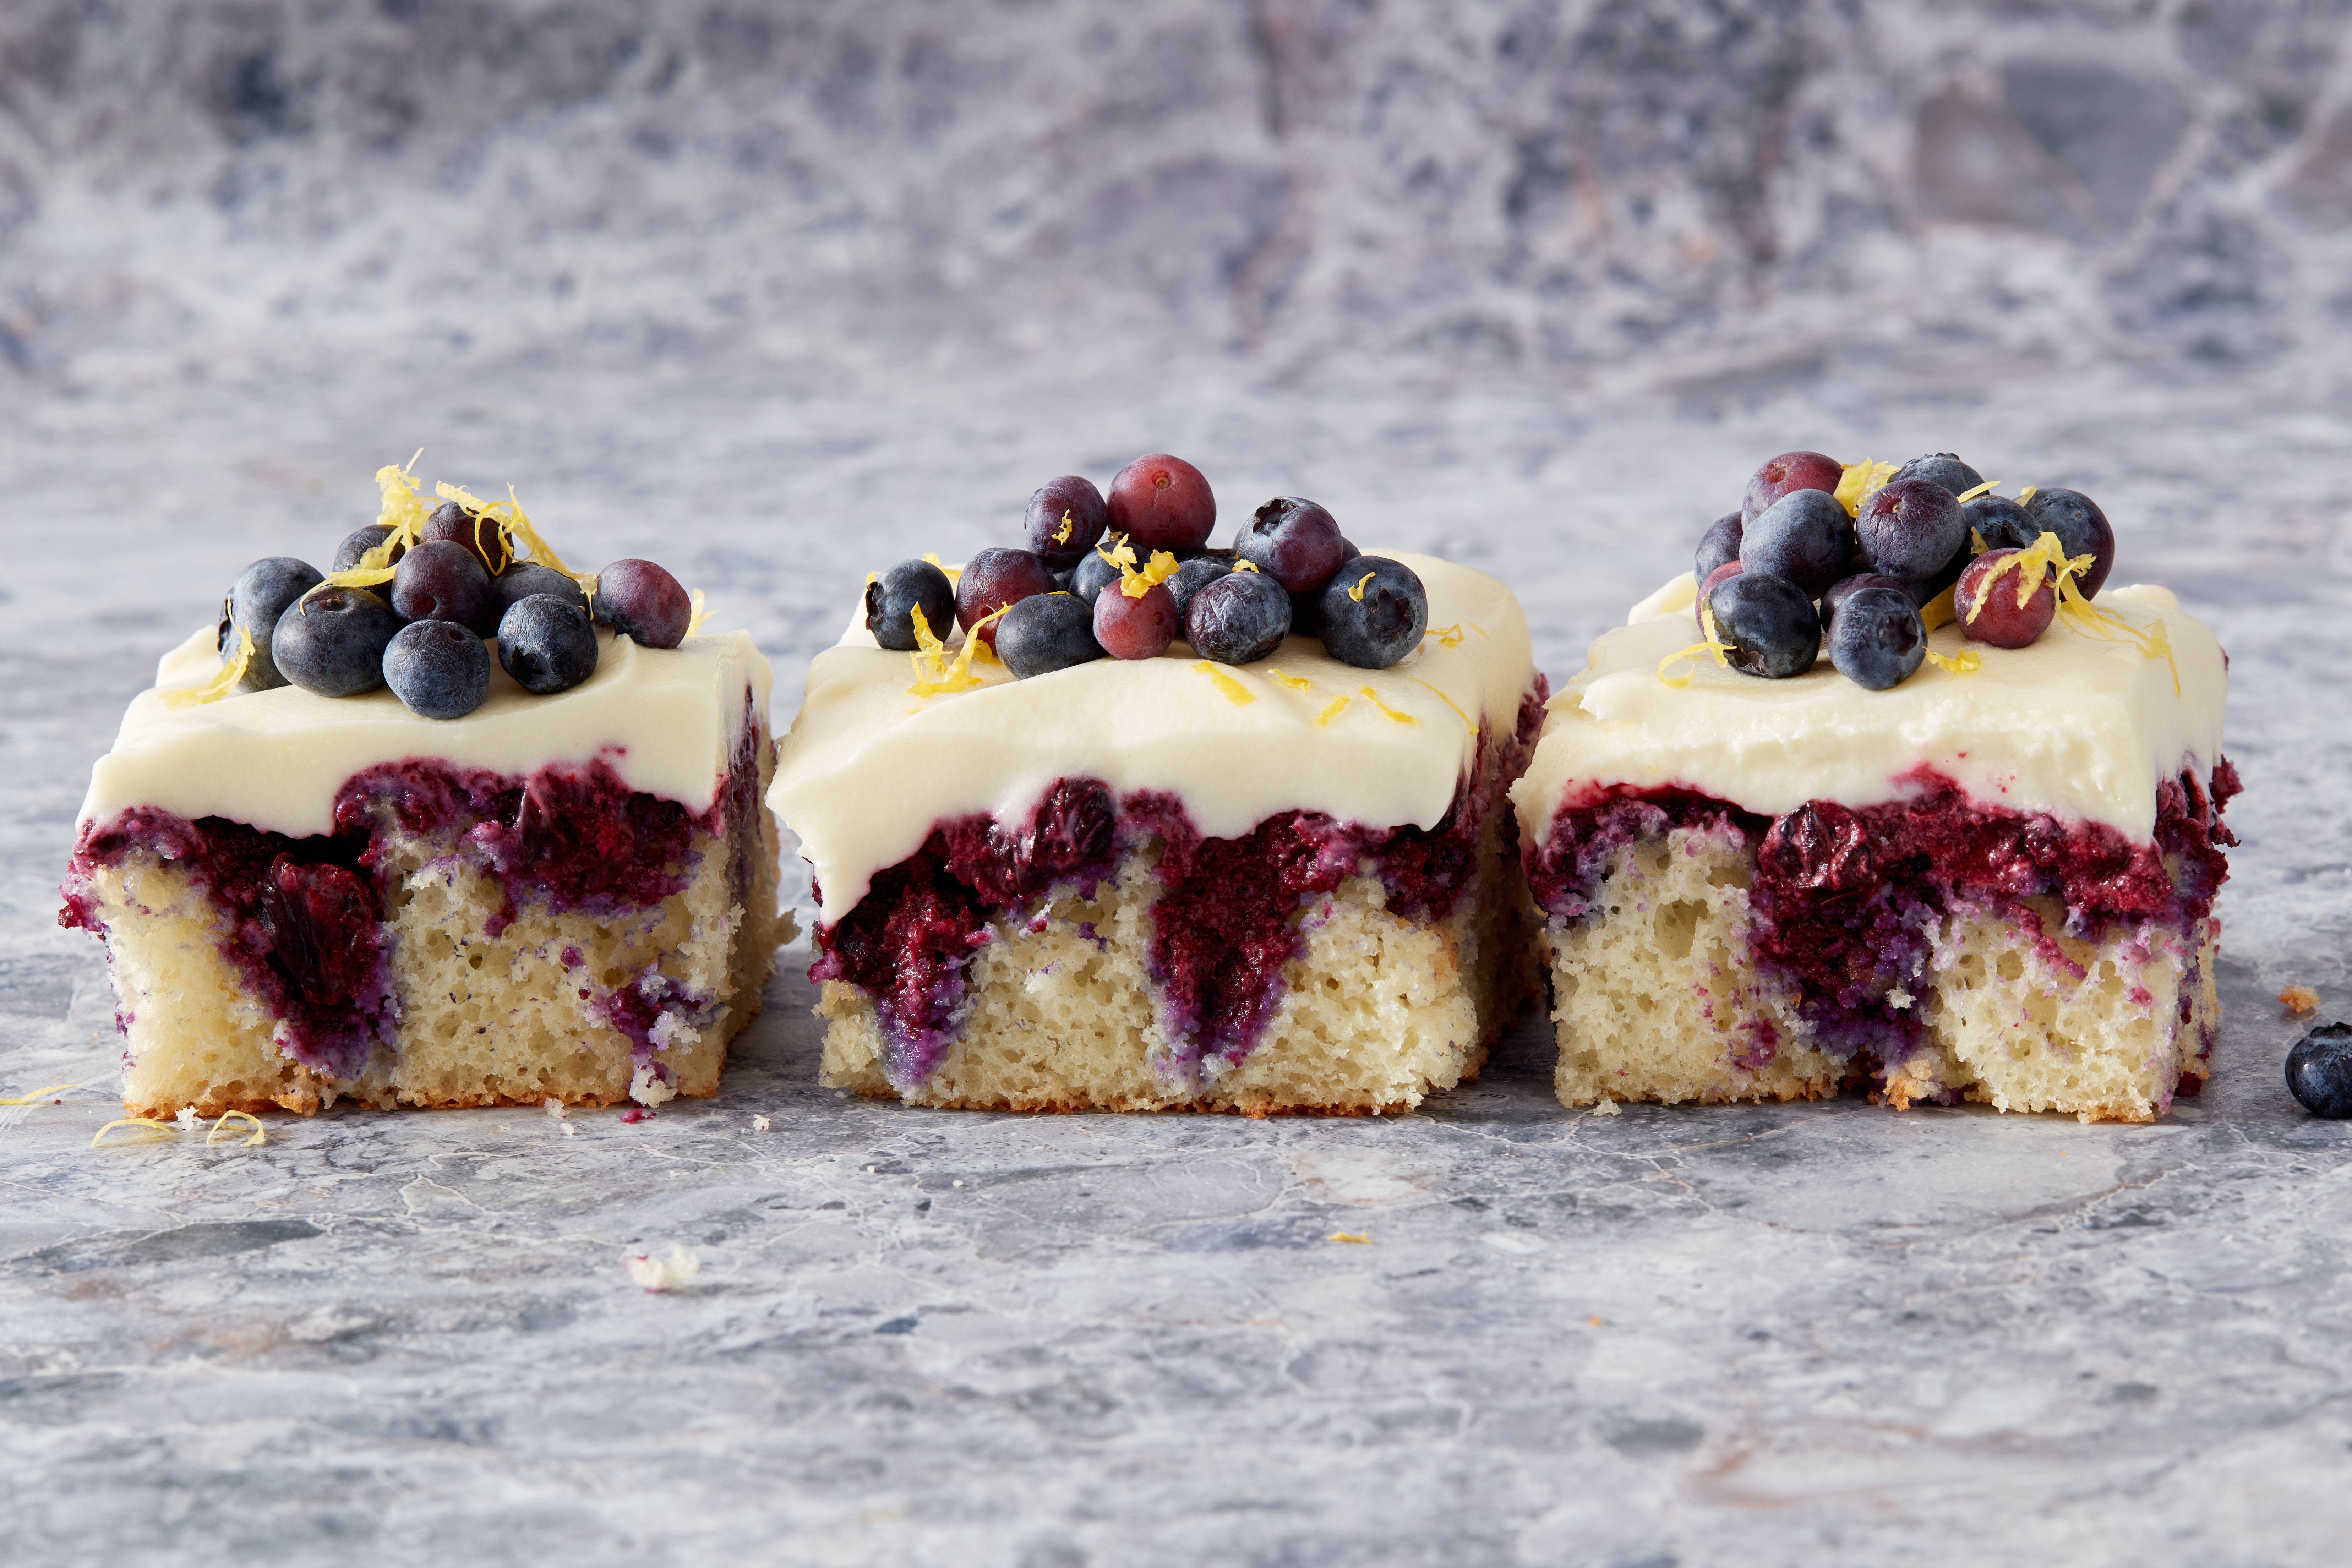 Blueberry Cake with Cream Cheese Frosting - My Gluten Free Guide